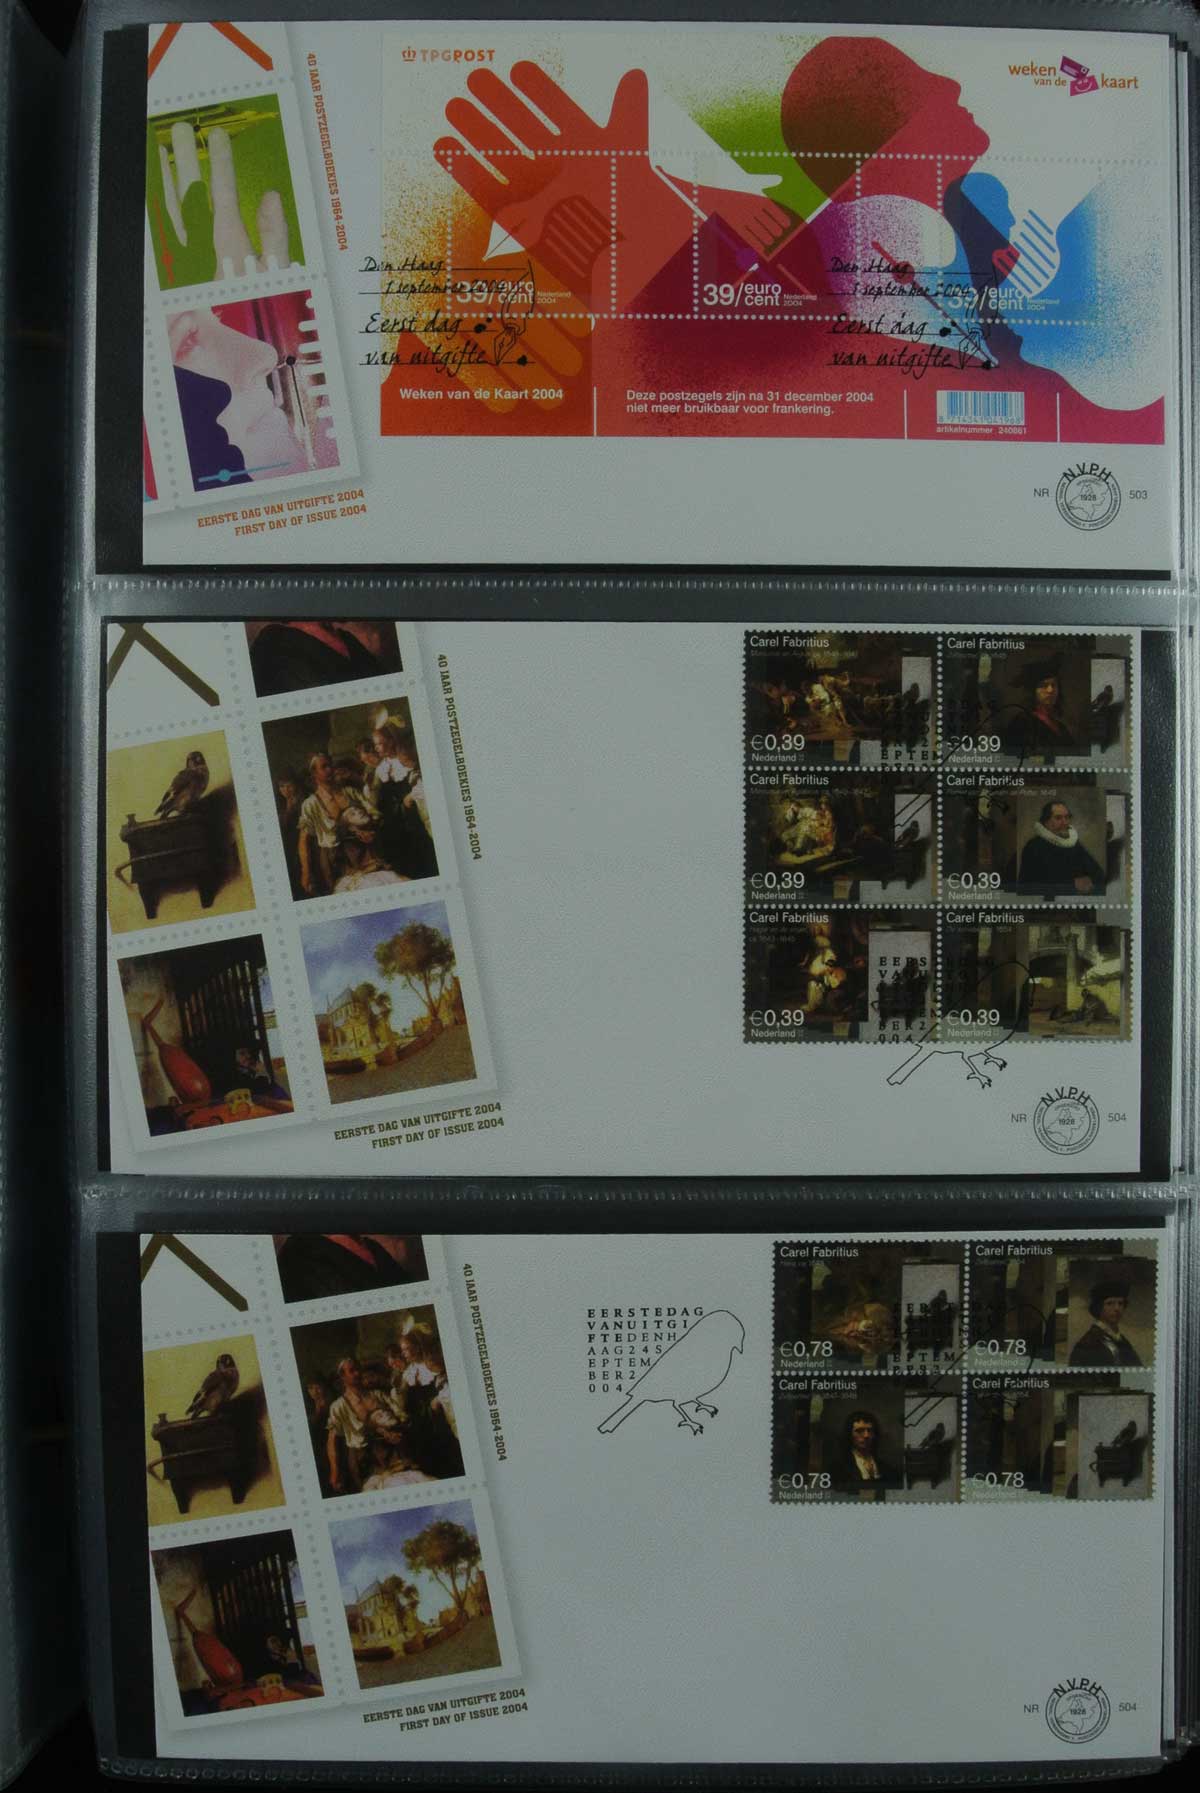 26836 071 - 26836 Netherlands FDC's 1995-2012.